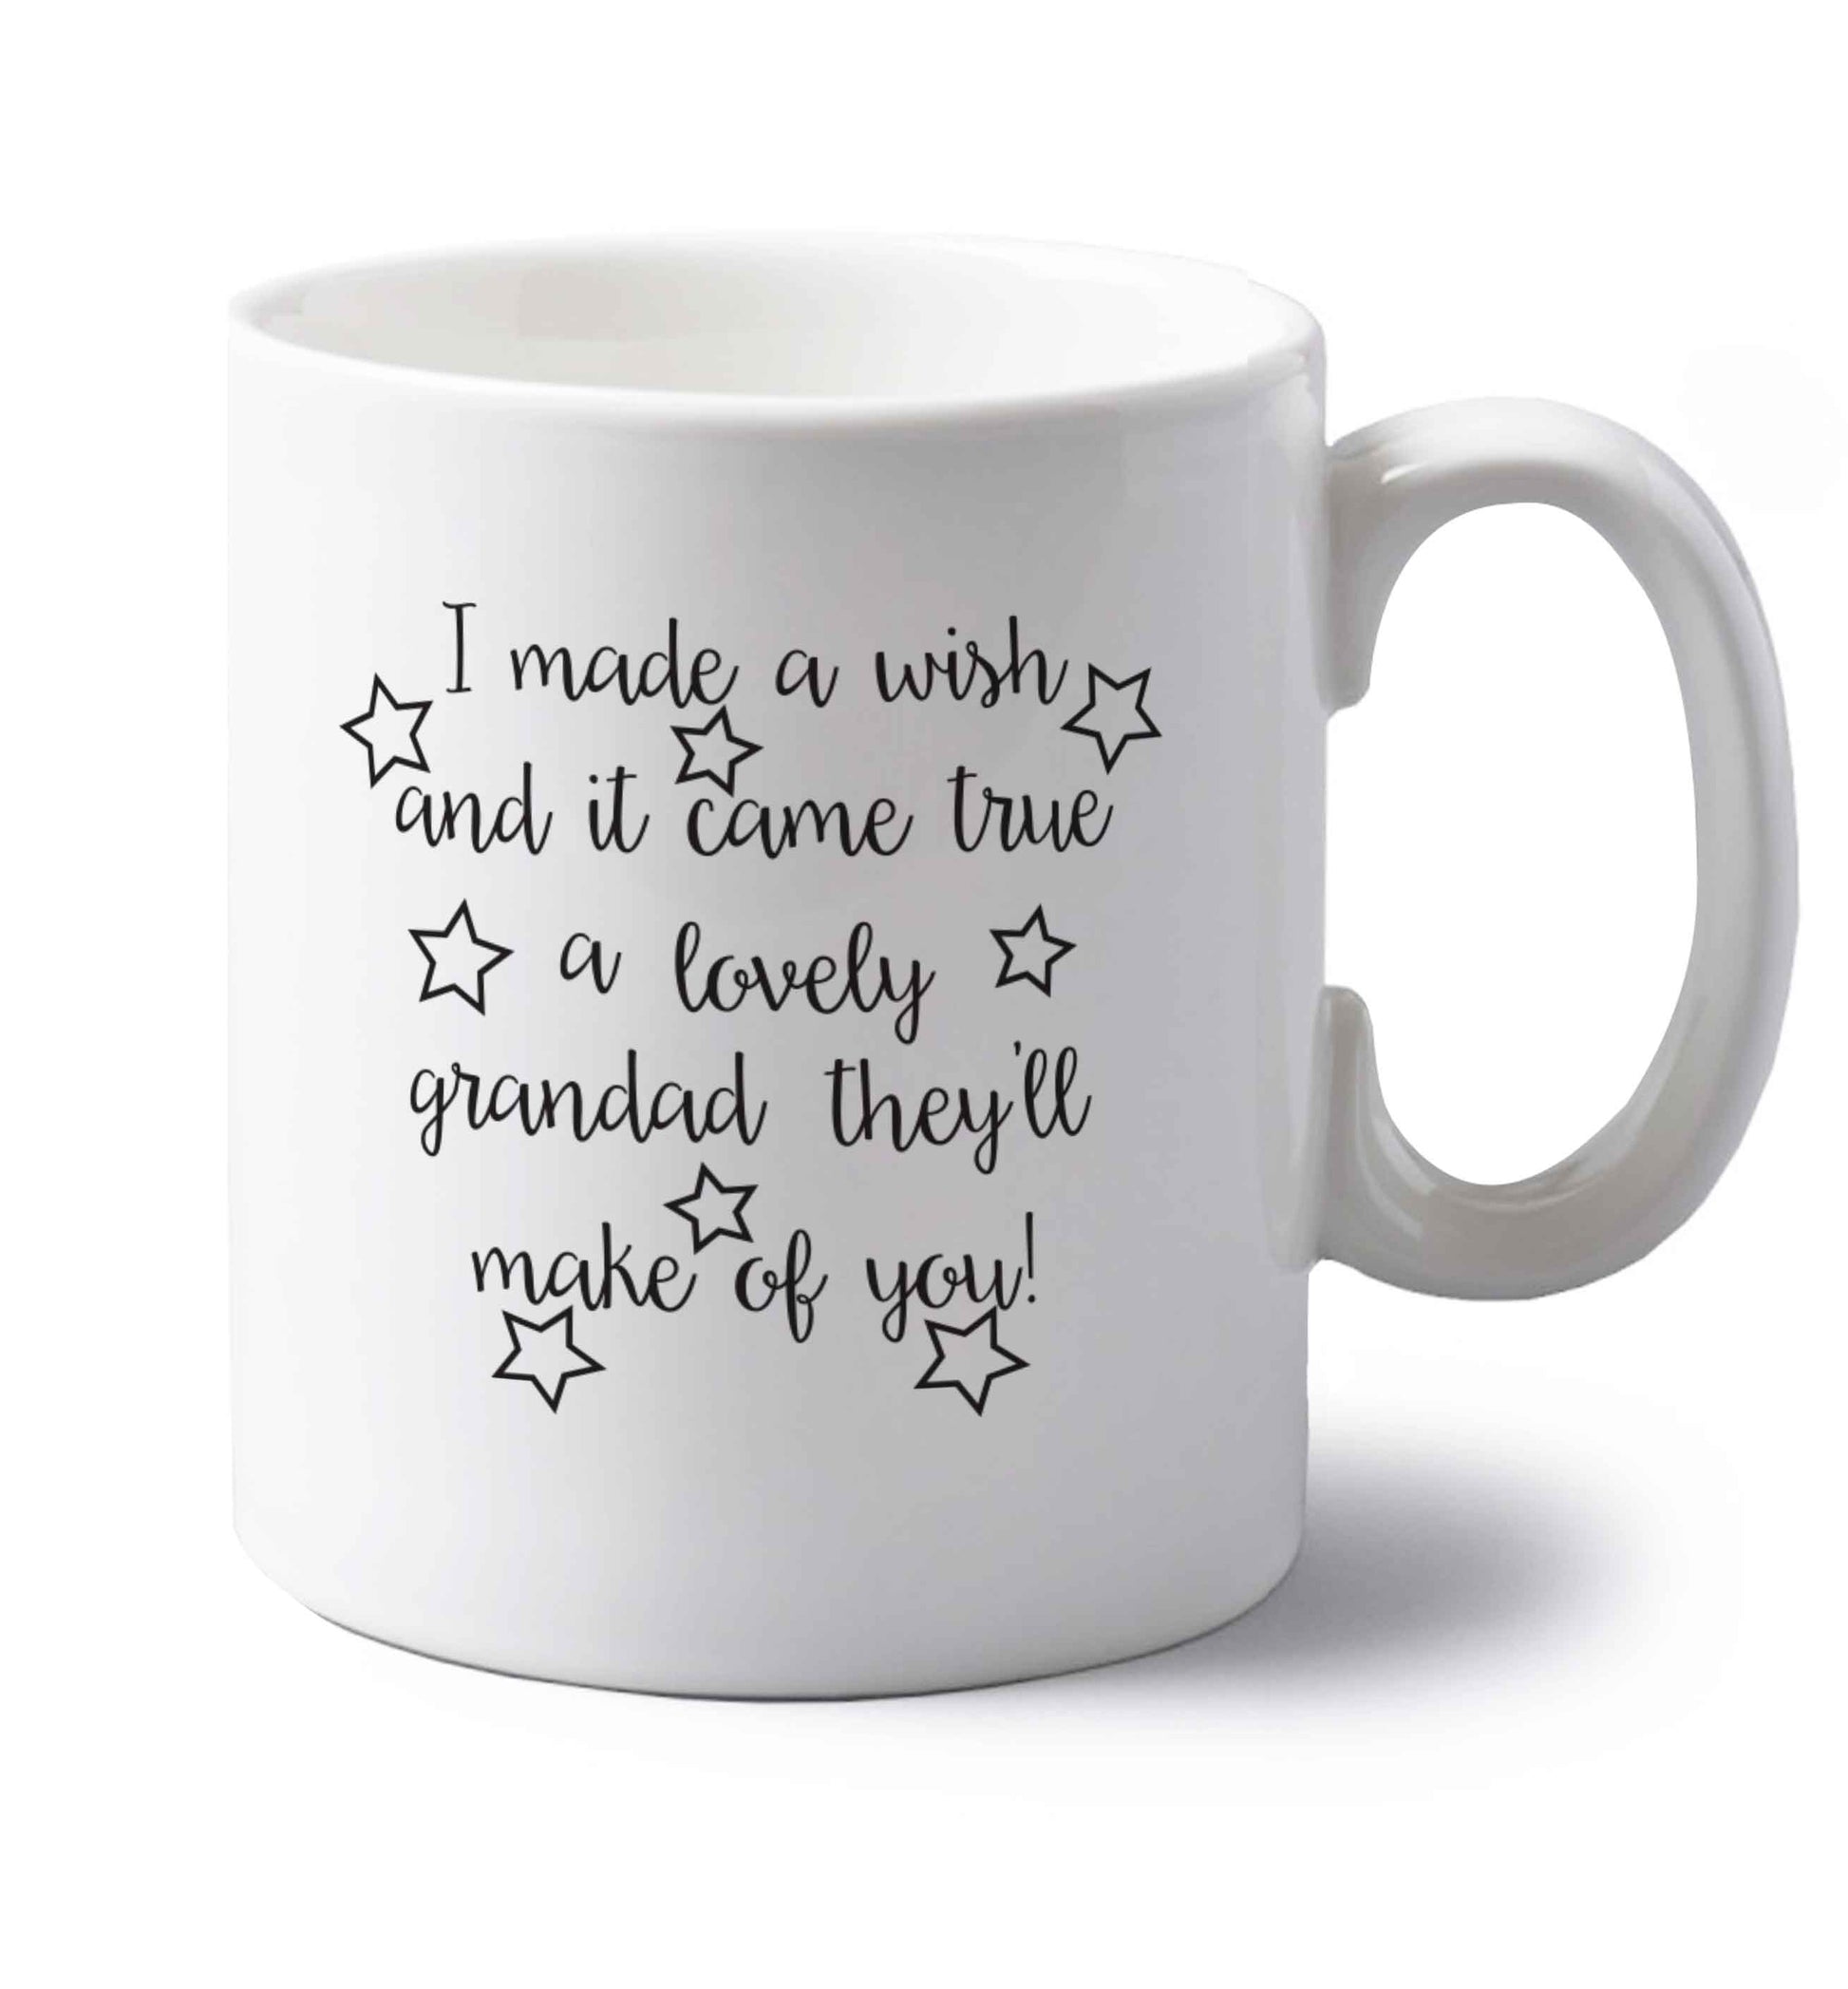 I made a wish and it came true a lovely grandad they'll make of you! left handed white ceramic mug 